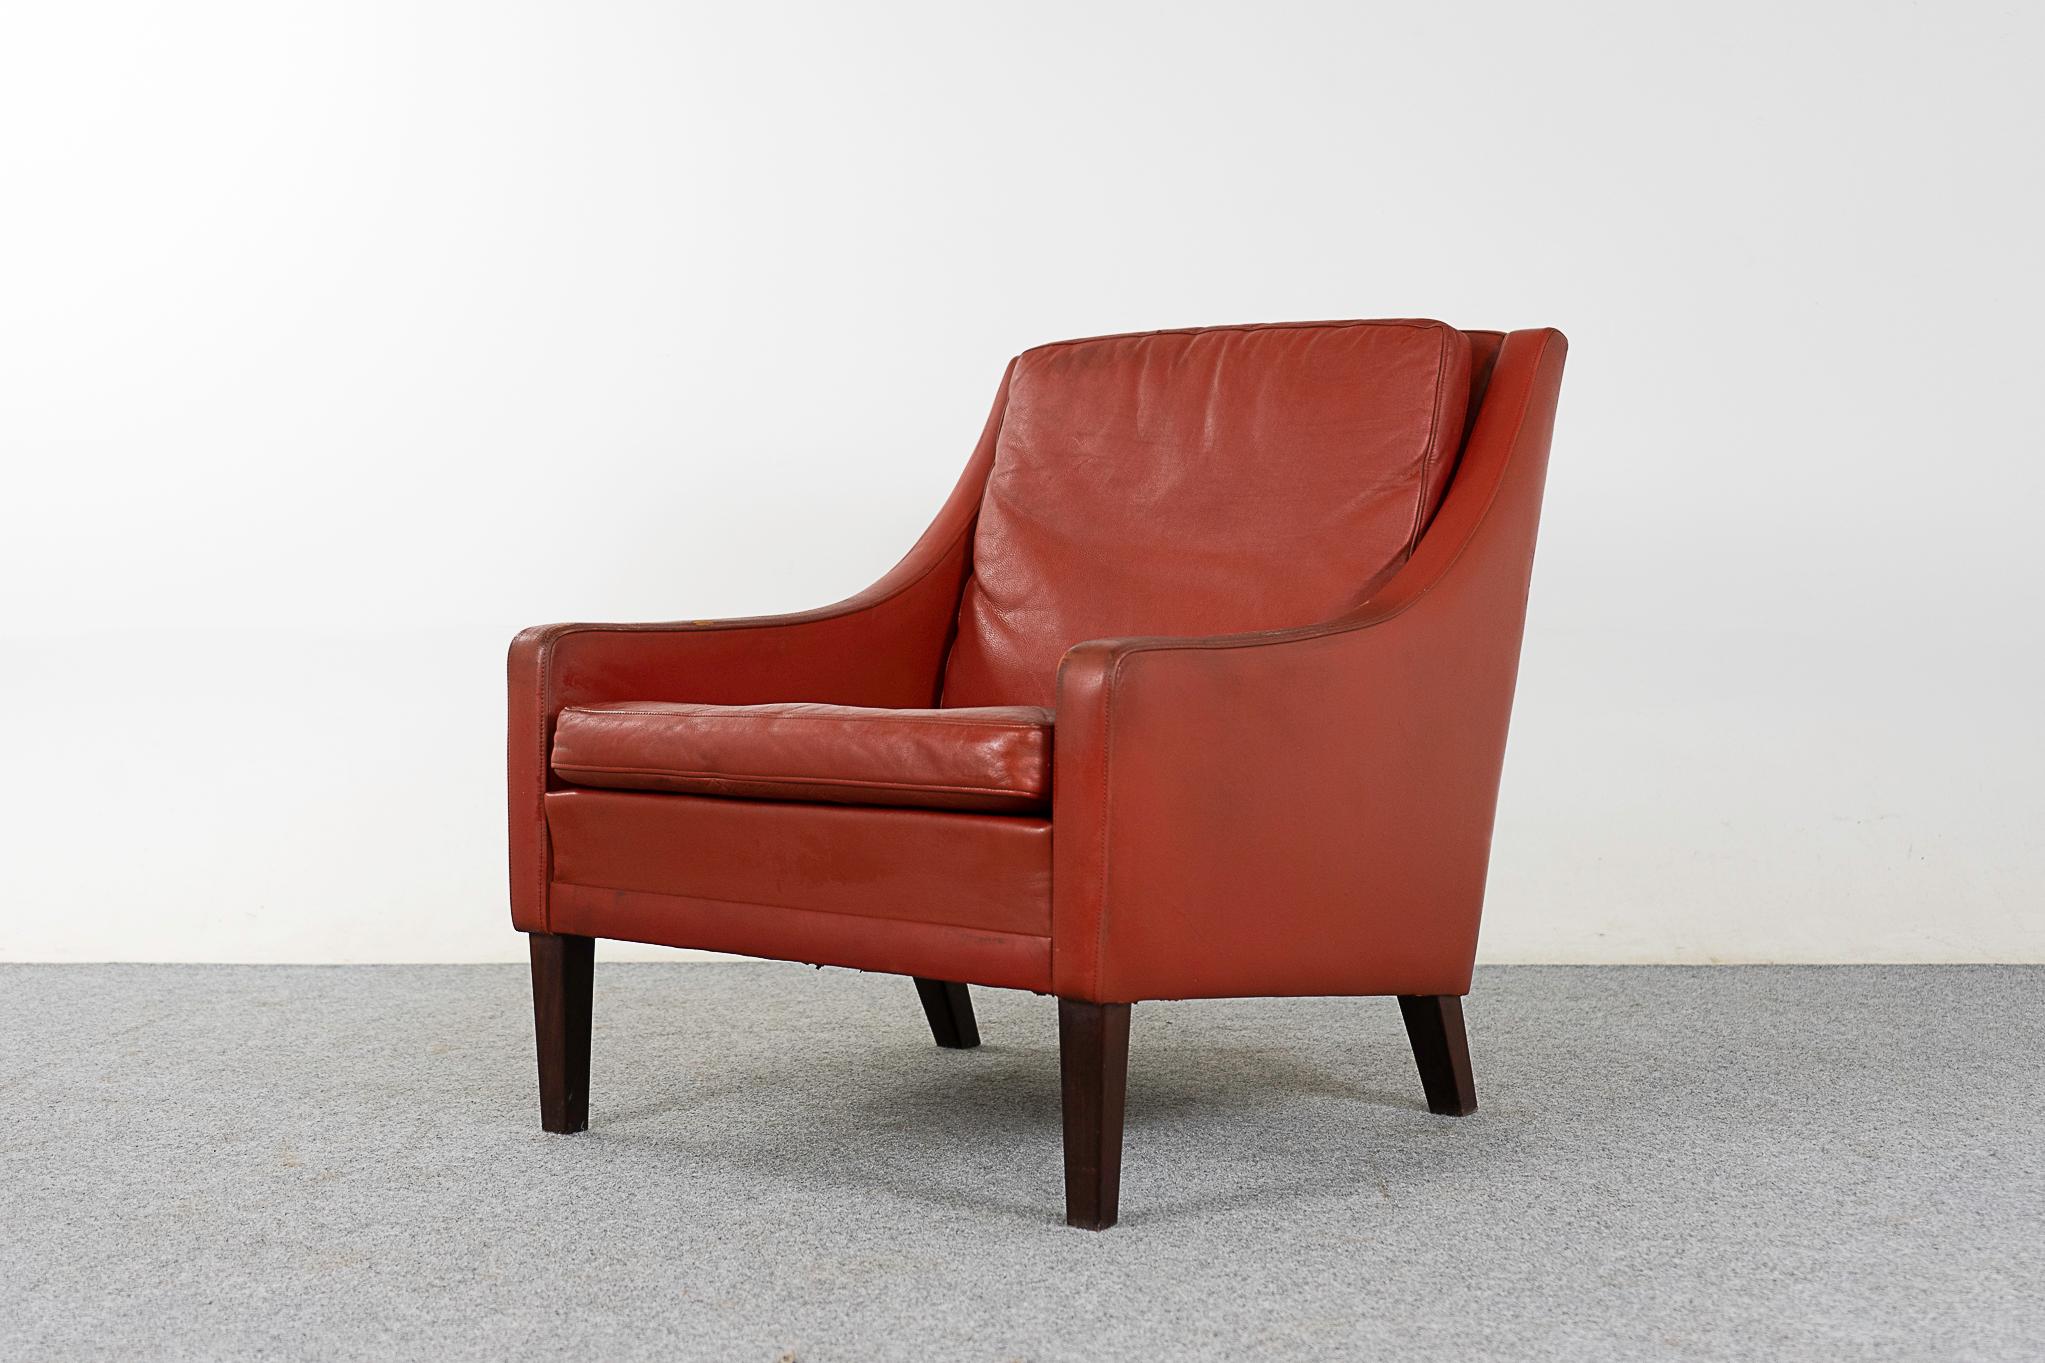 Leather mid-century lounge chair, circa 1960's. Swooping arms and robust angled legs. Original rust colored leather in nice condition, some marks consistent with age on the hand rests. Comfortable!

Please inquire for remote and international